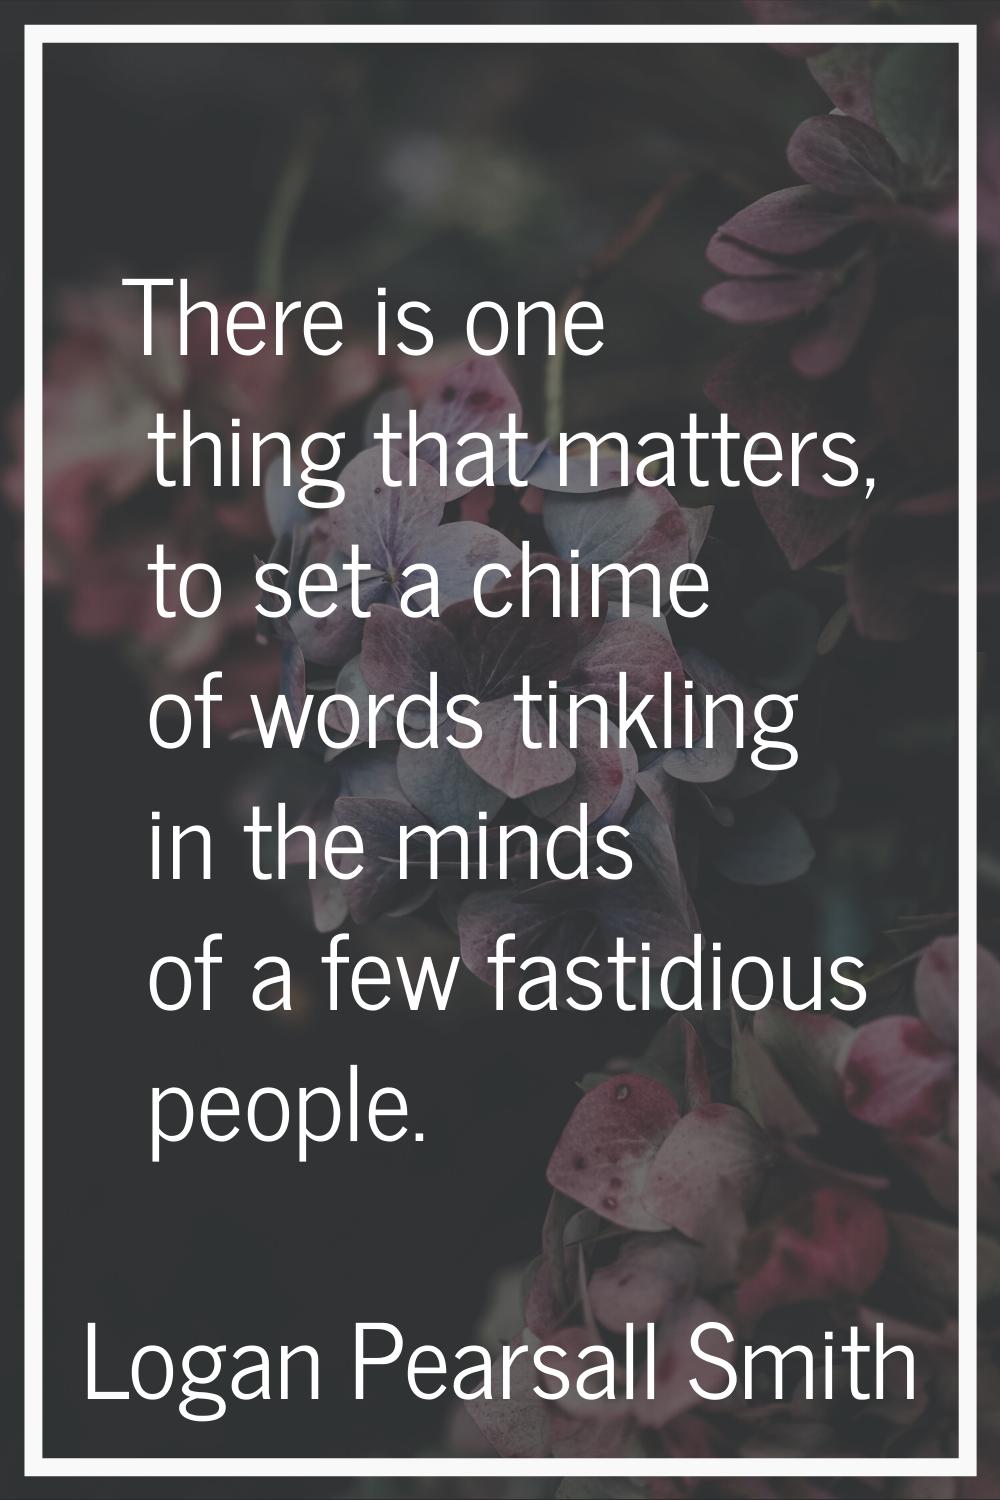 There is one thing that matters, to set a chime of words tinkling in the minds of a few fastidious 